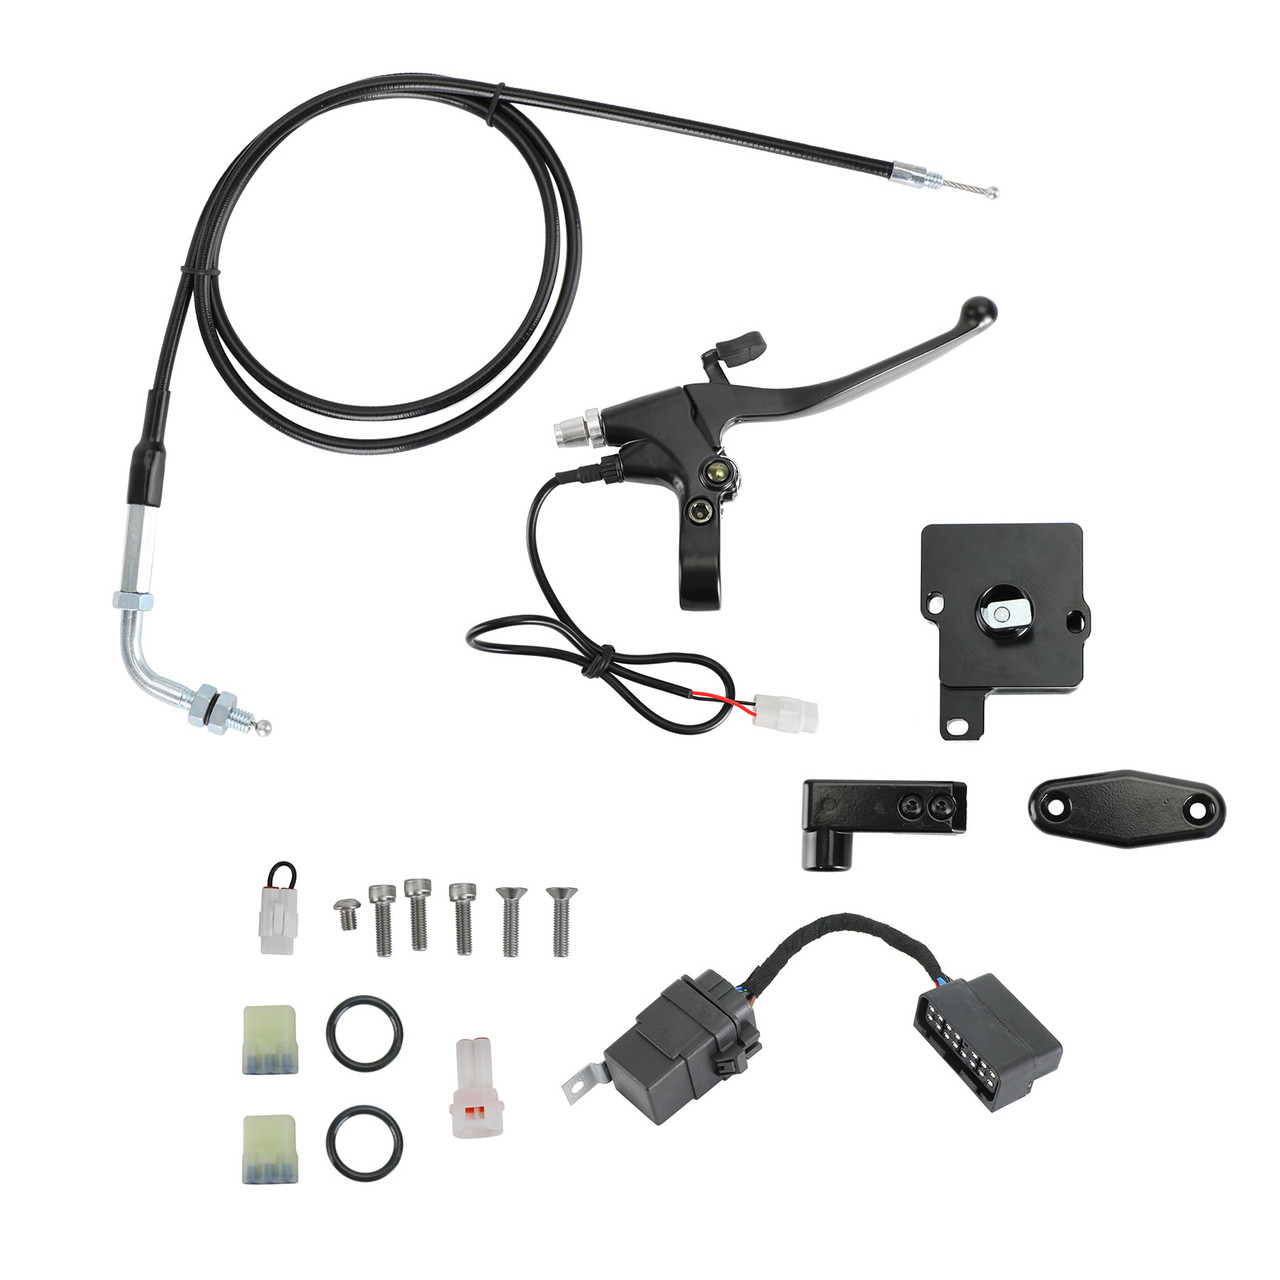 4Wd Actuator Shifter Ultimate Kit Fit for Suzuki Brute Force Lt-V700F 700 2004